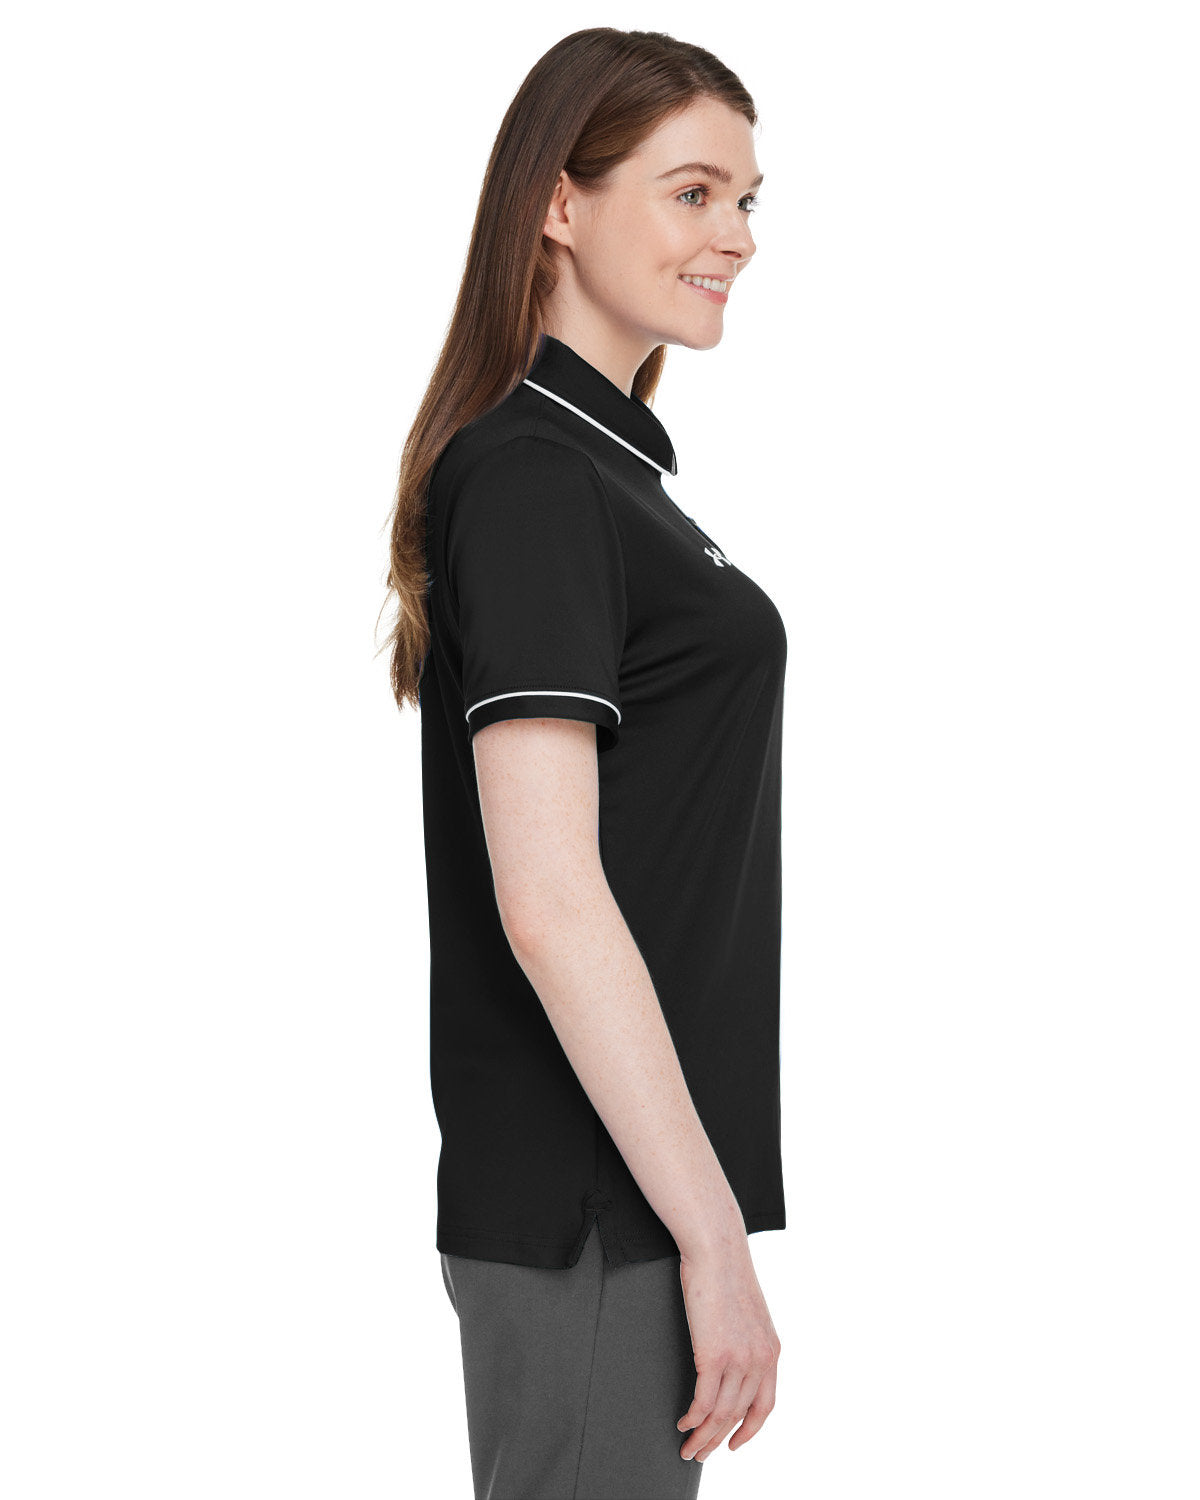 Under Armour Ladies Tipped Teams Performance Customized Polos, Black